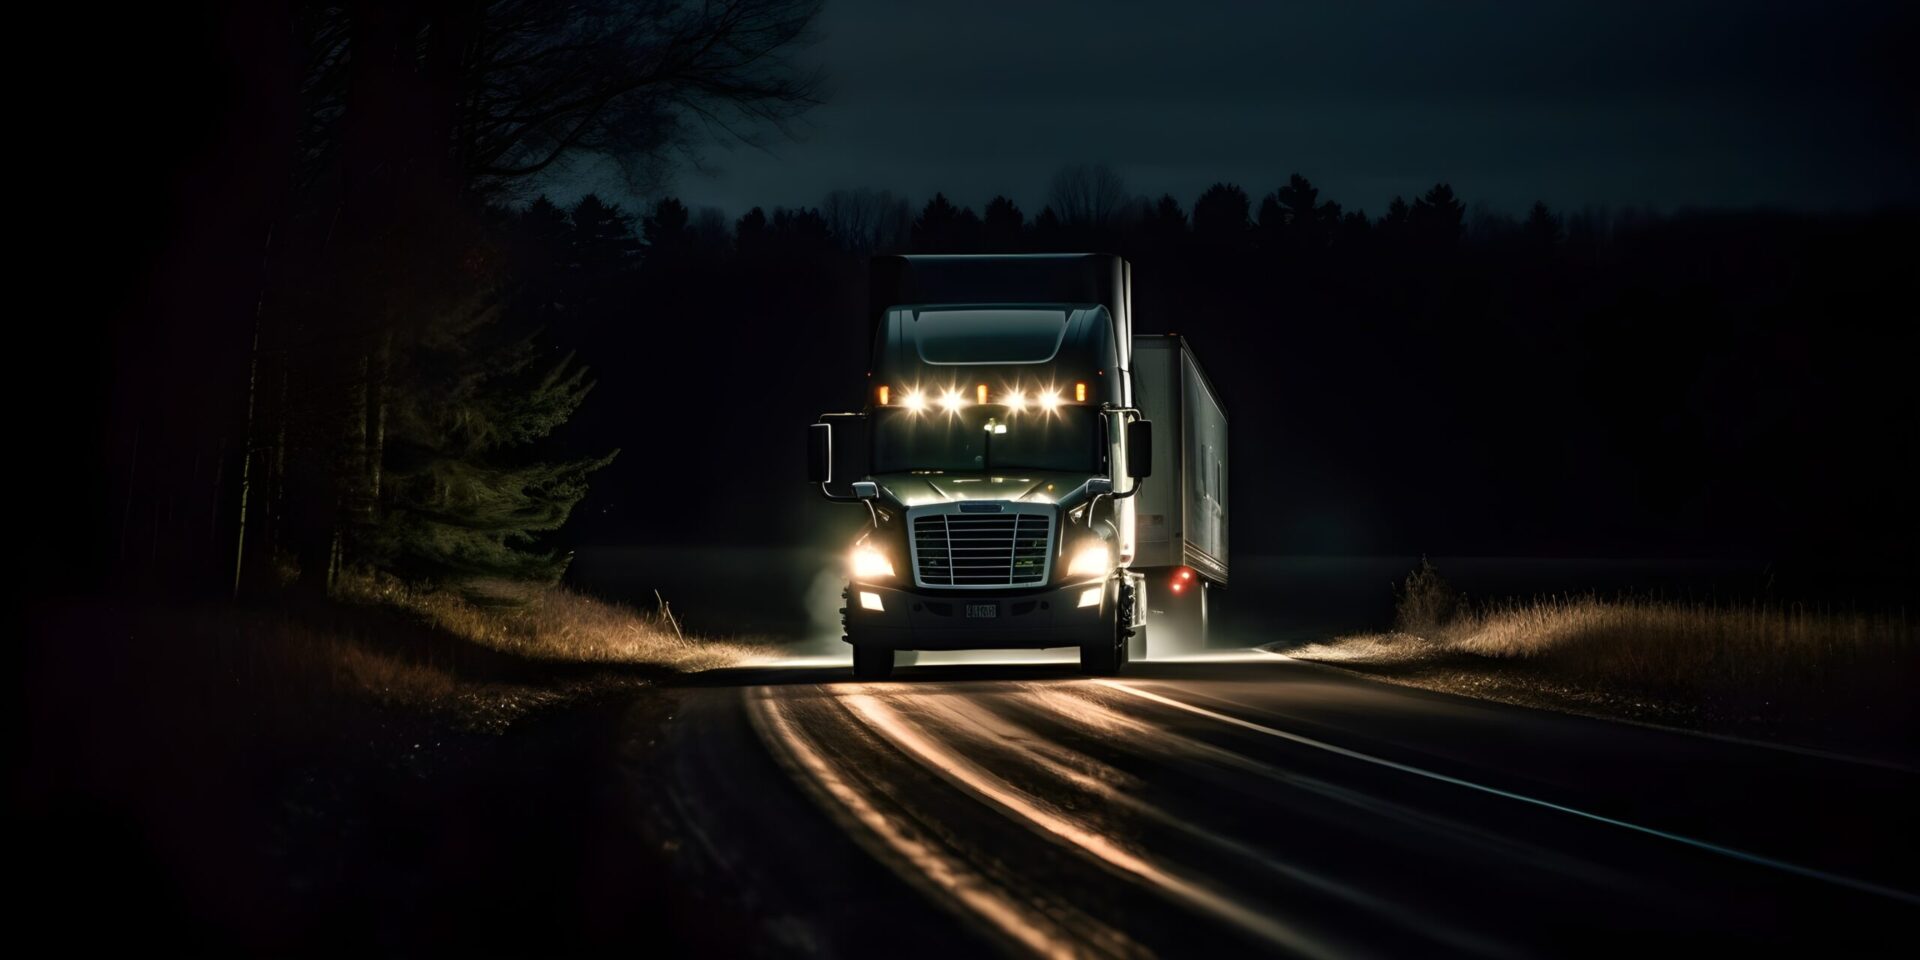 A night-time front view of a semi-truck driving on the road